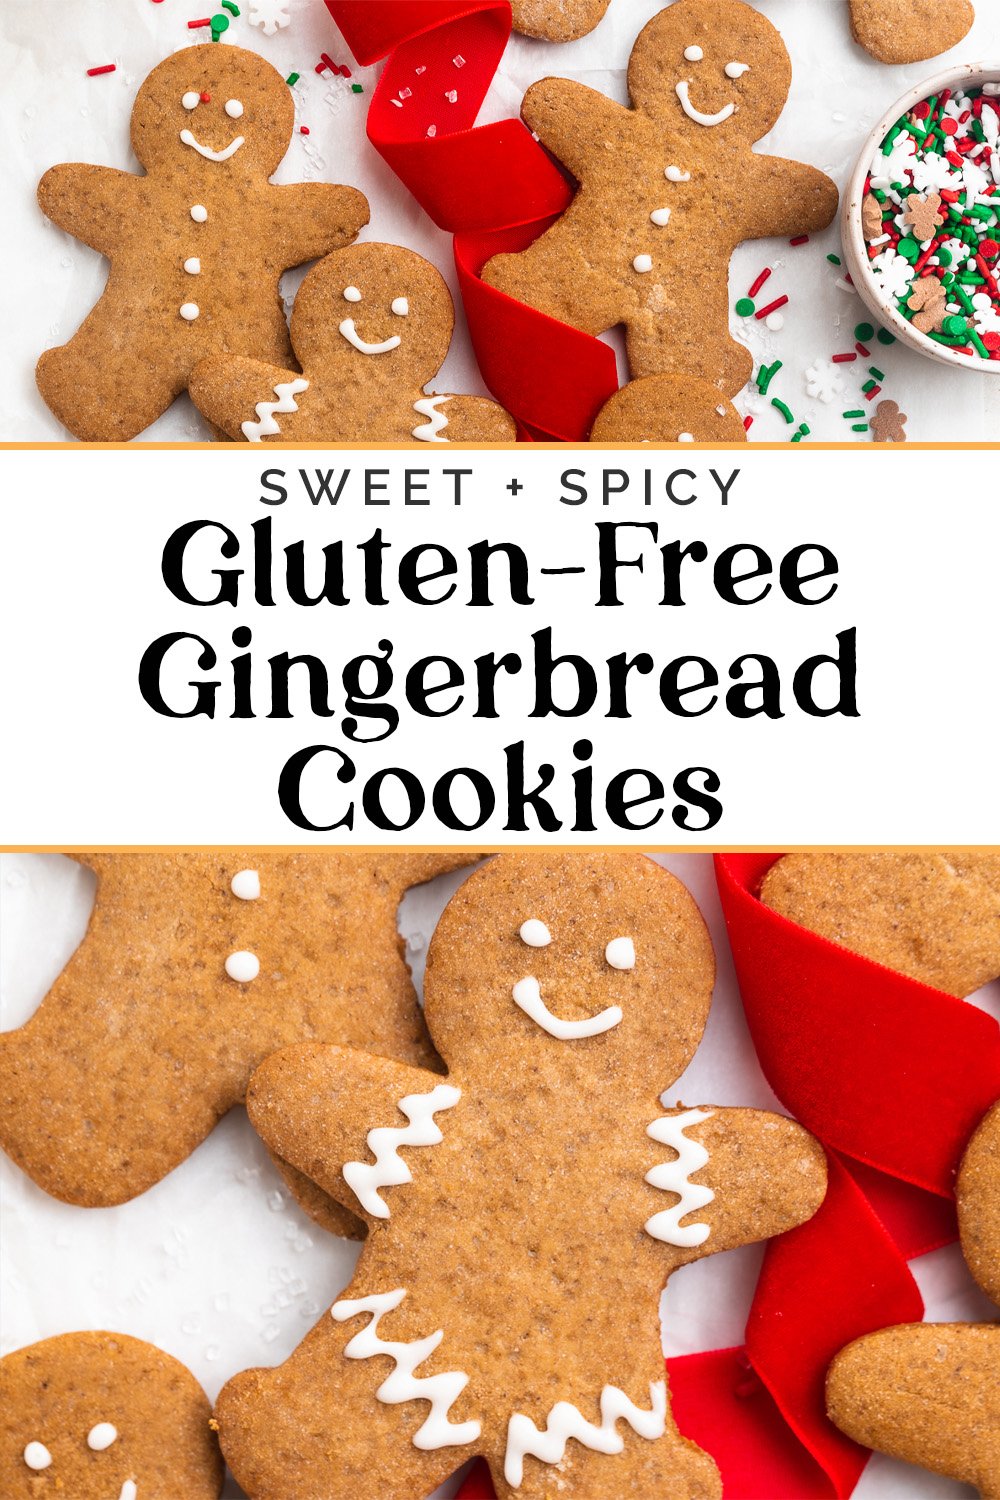 Pin graphic for gluten-free gingerbread cookies.